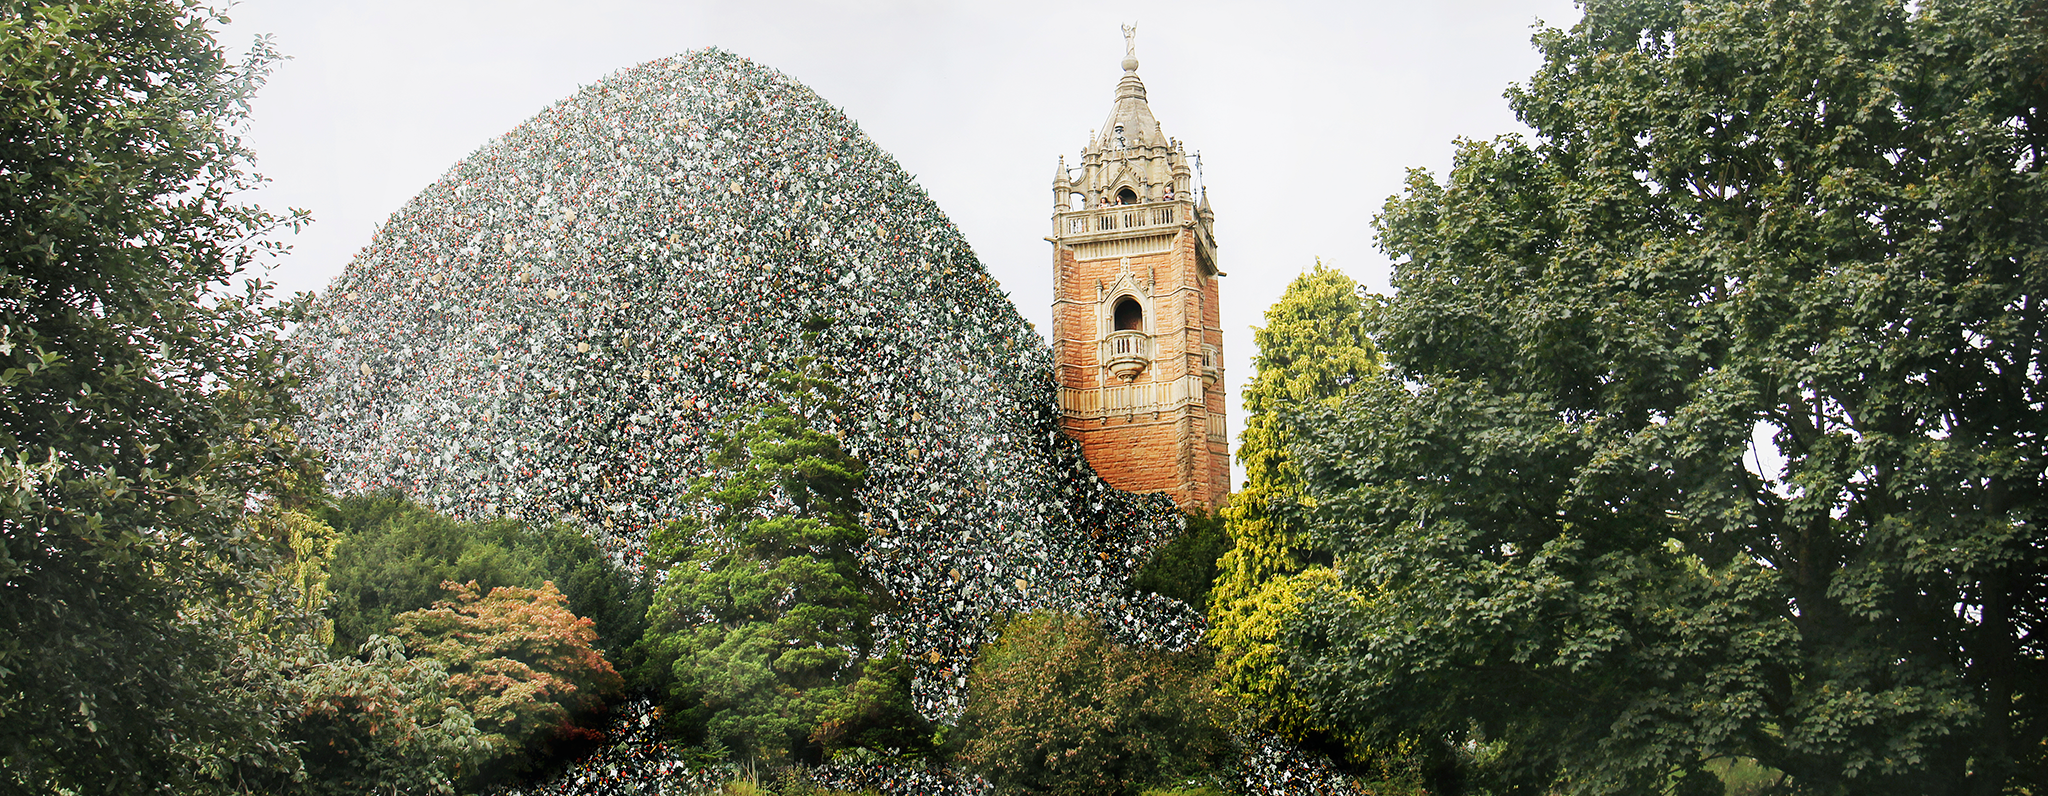 A computer generated image of a pile of litter next to Cabot Tower in Bristol